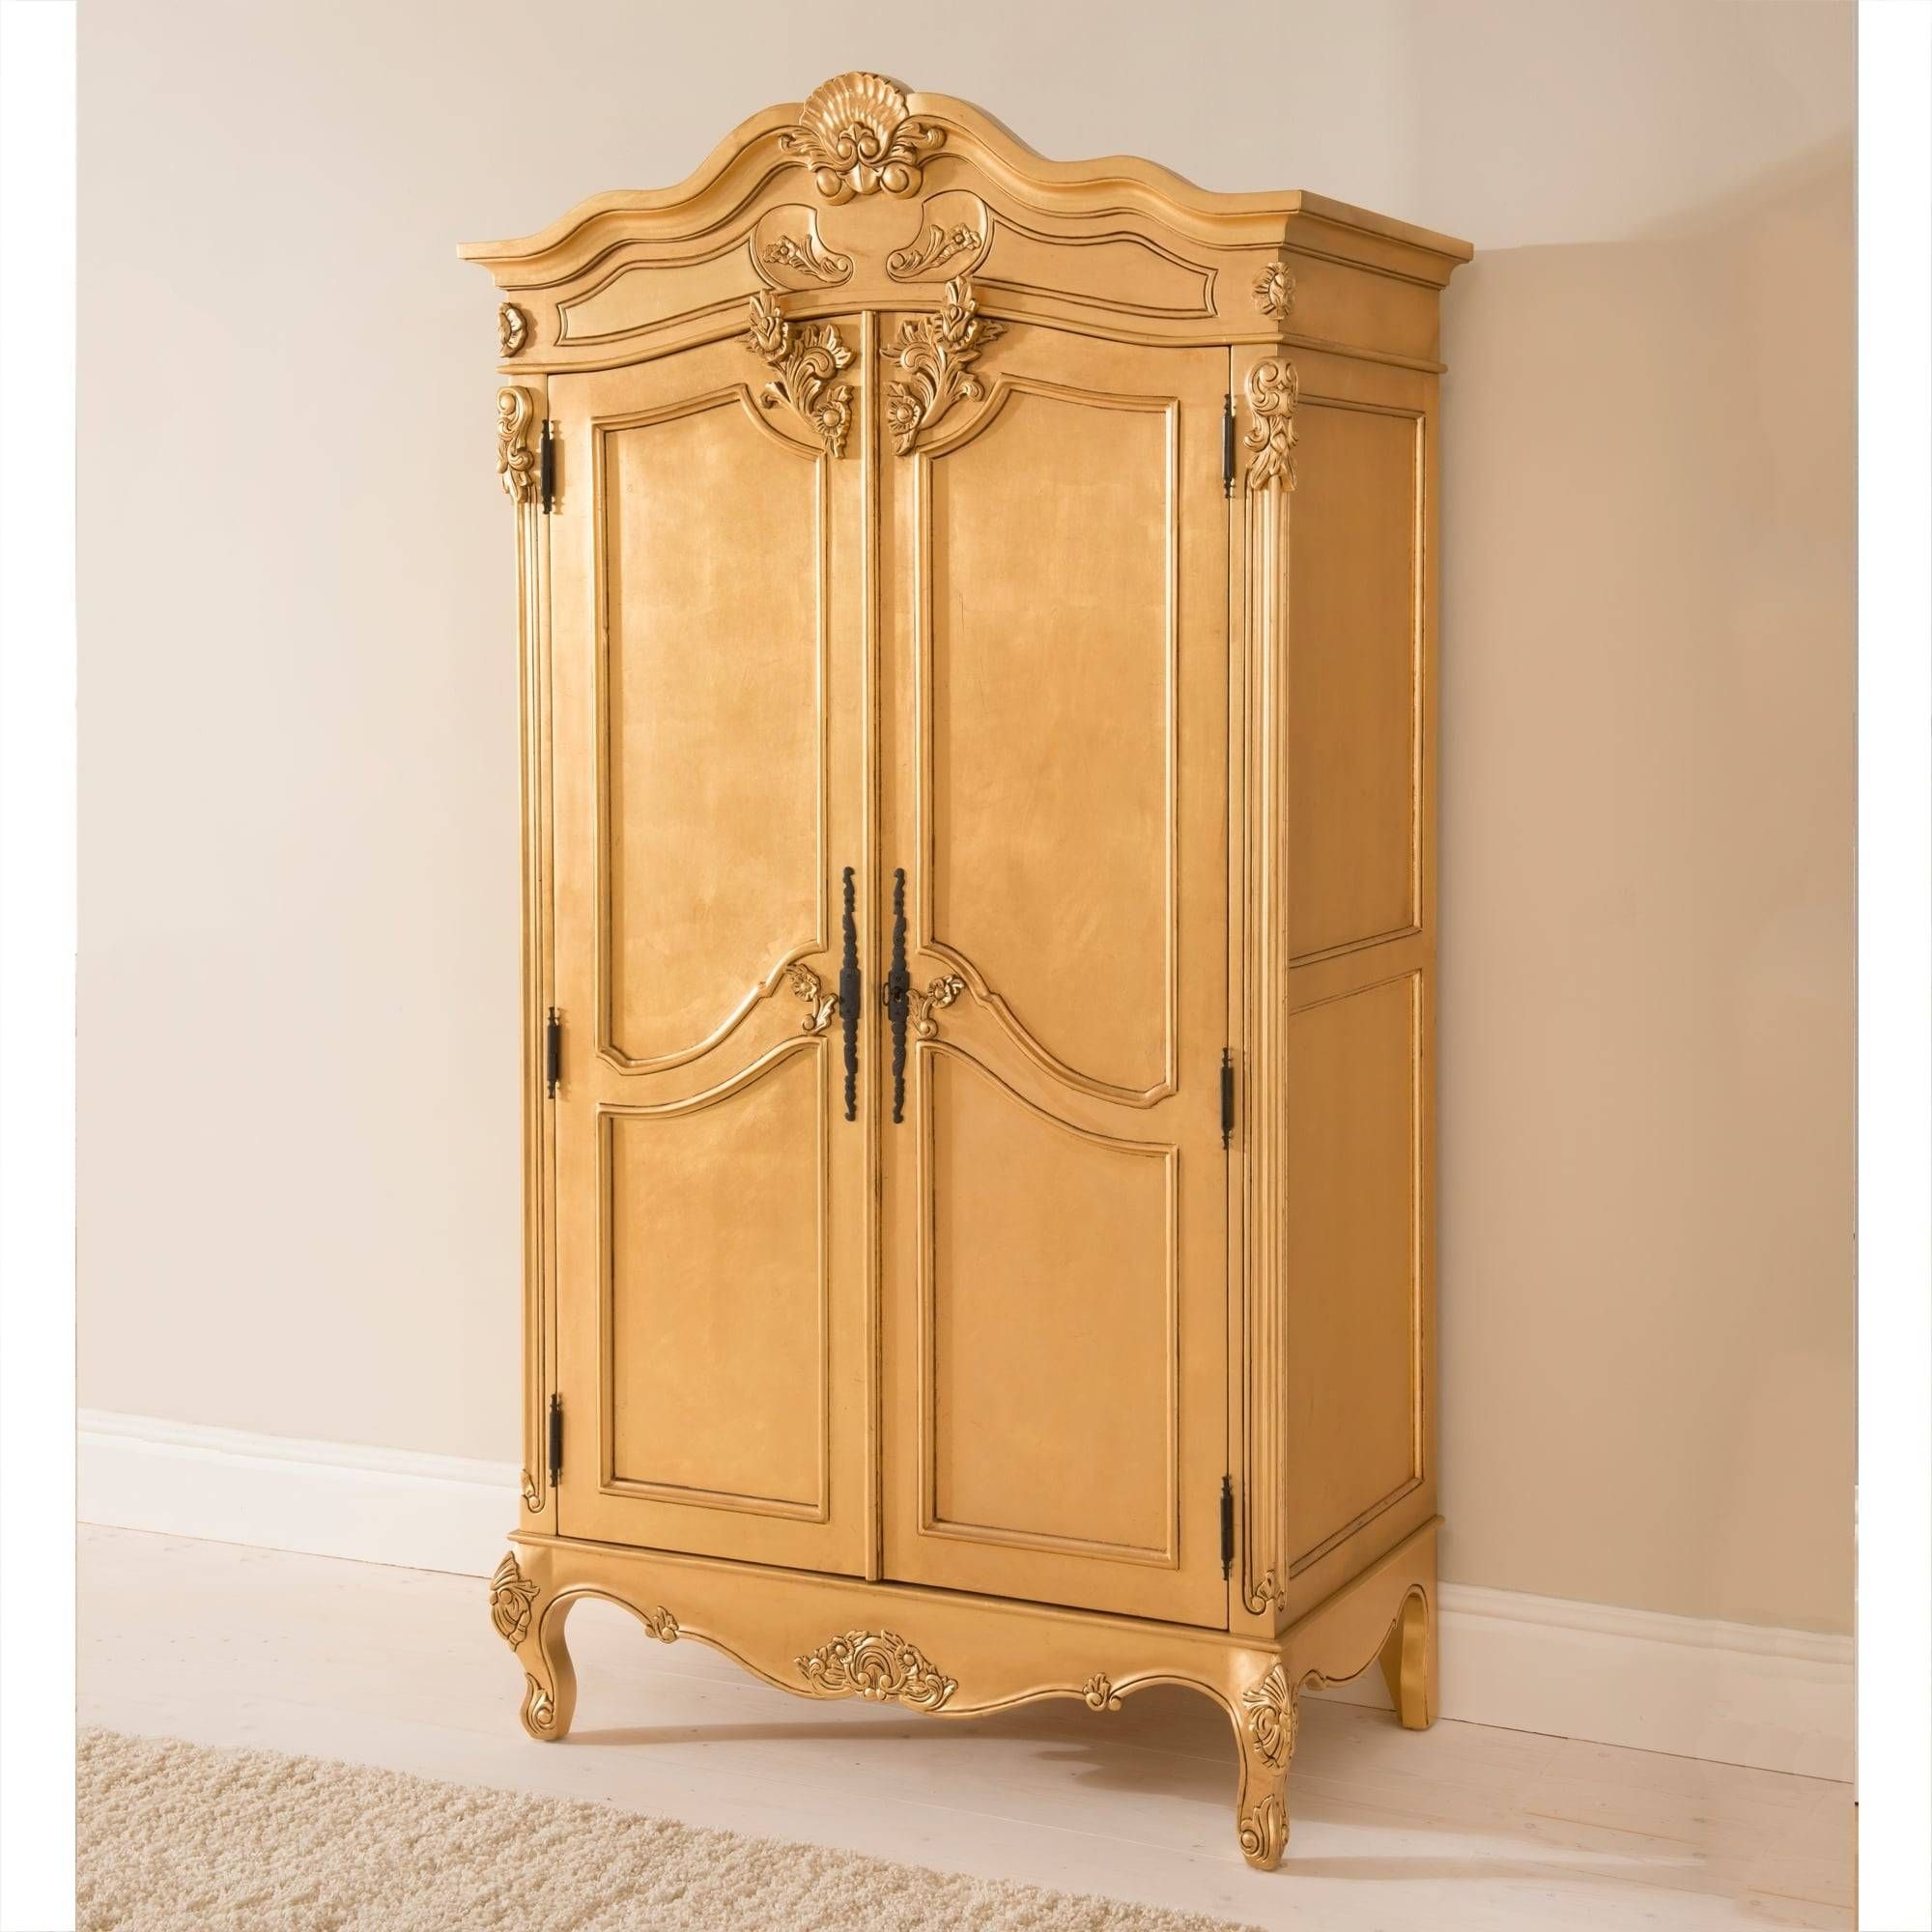 Baroque Antique French Wardrobe | Gold Leaf Furniture Intended For Baroque Wardrobes (View 4 of 15)